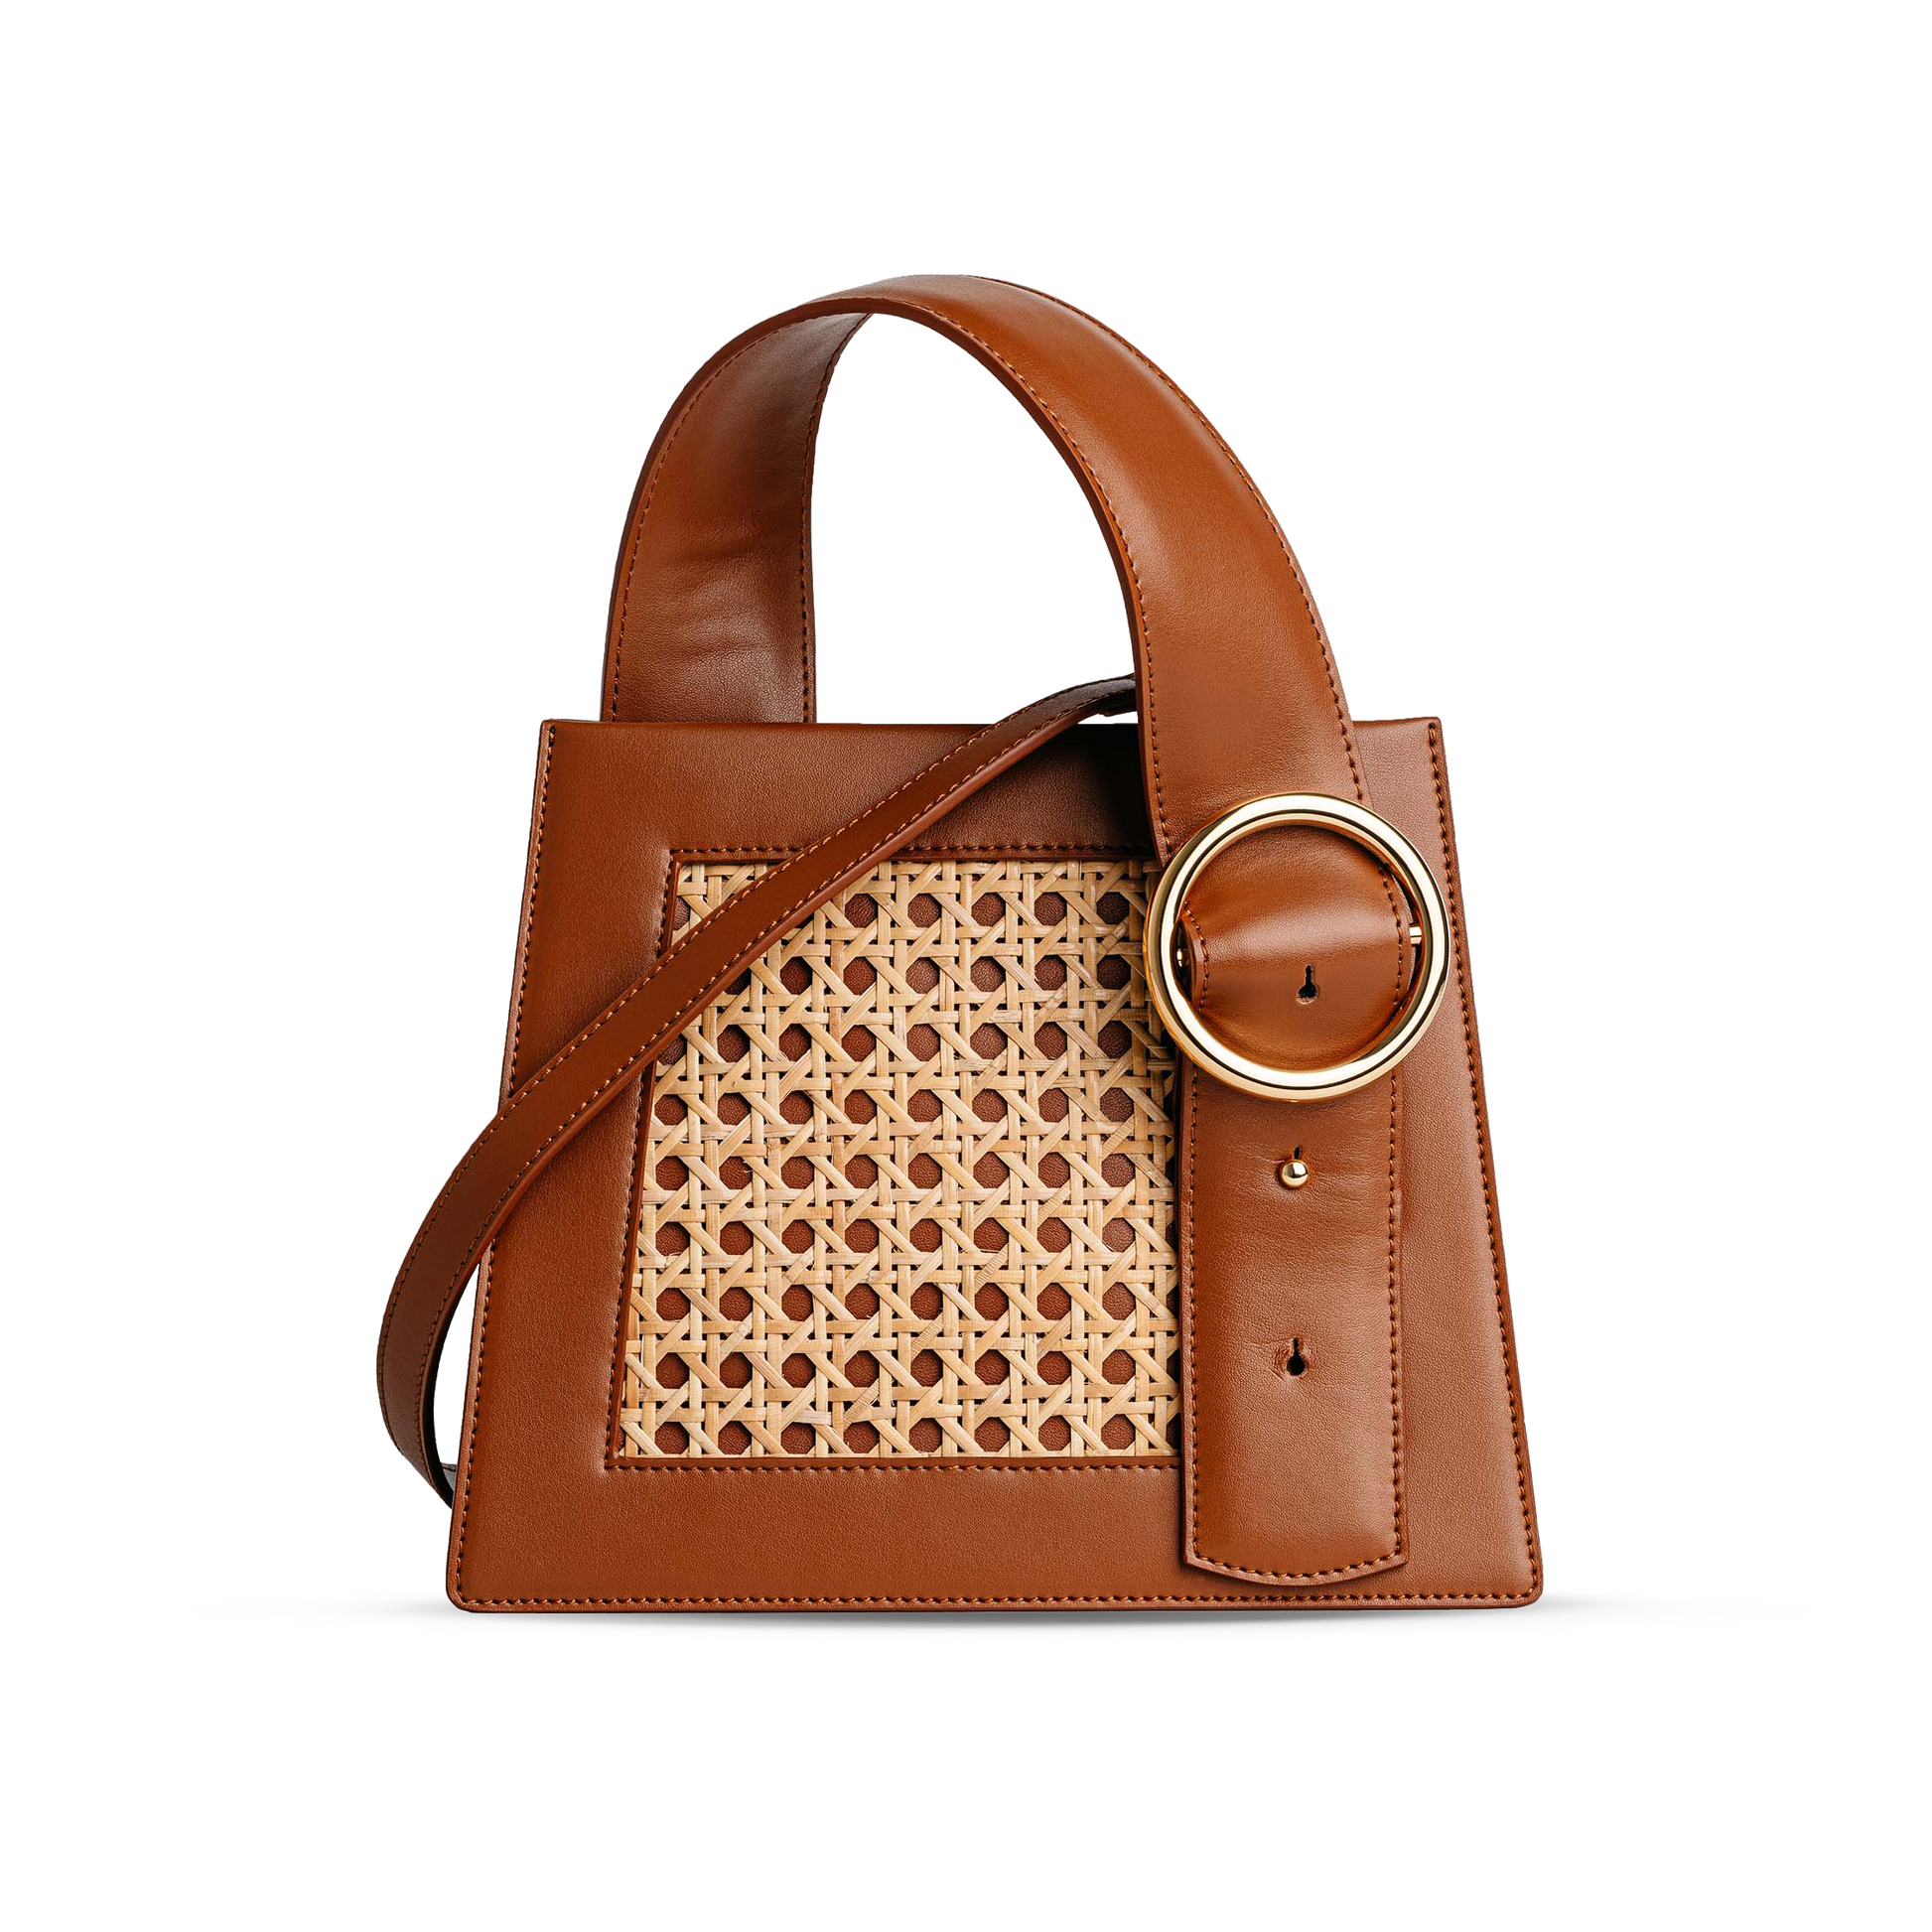 What does everyone think about the By Far Amber bag? : r/handbags